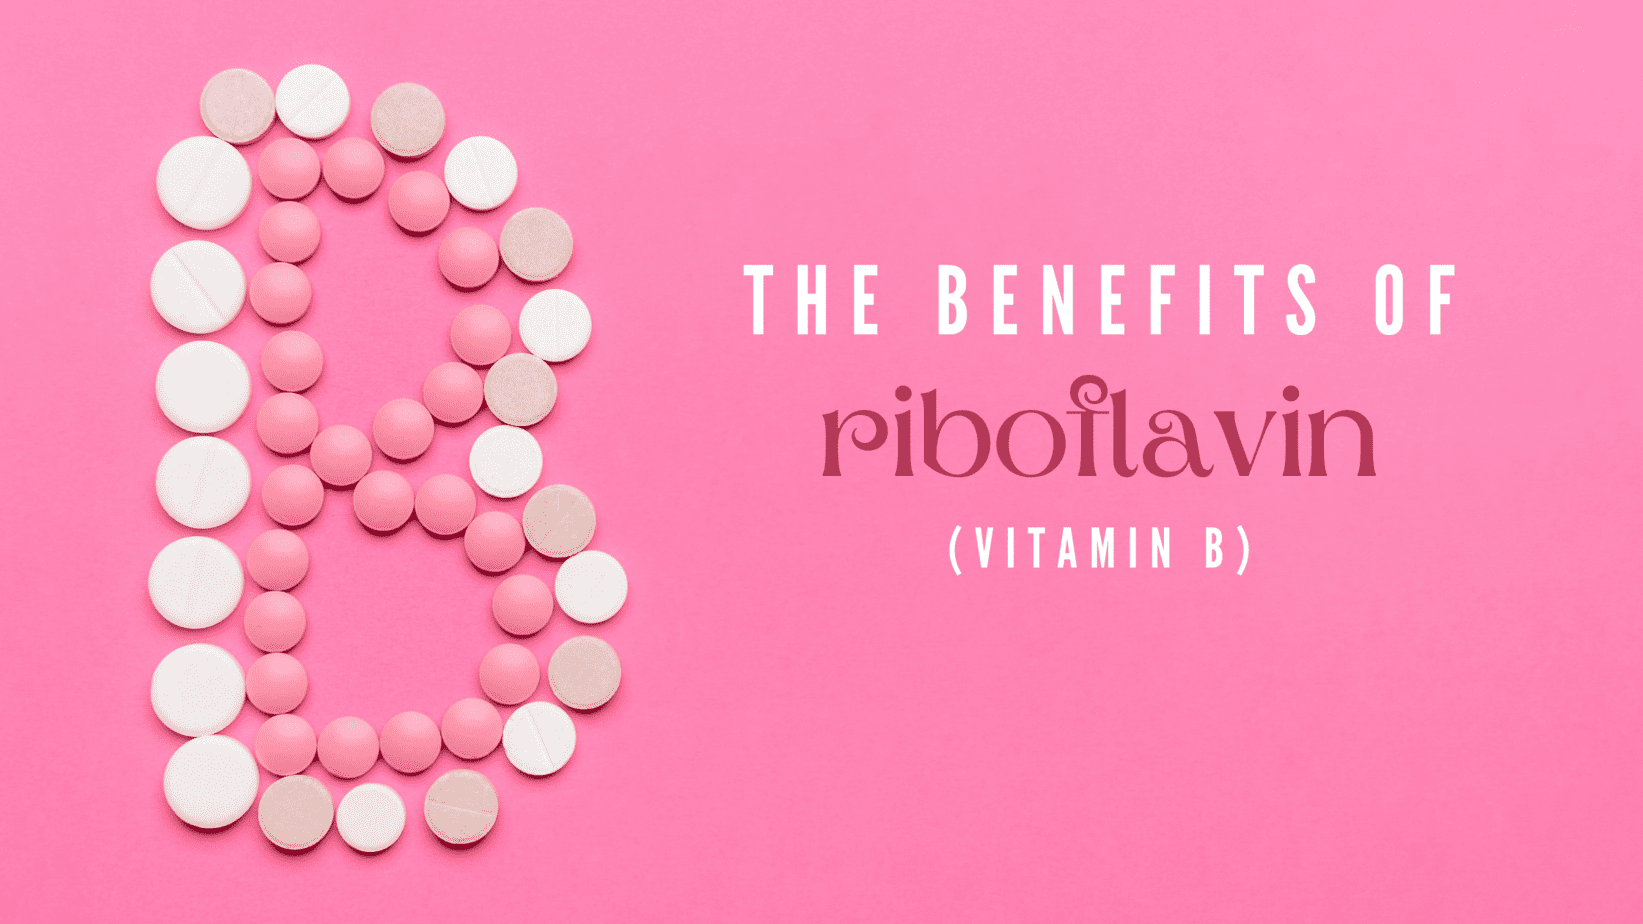 The benefits of Riboflavin